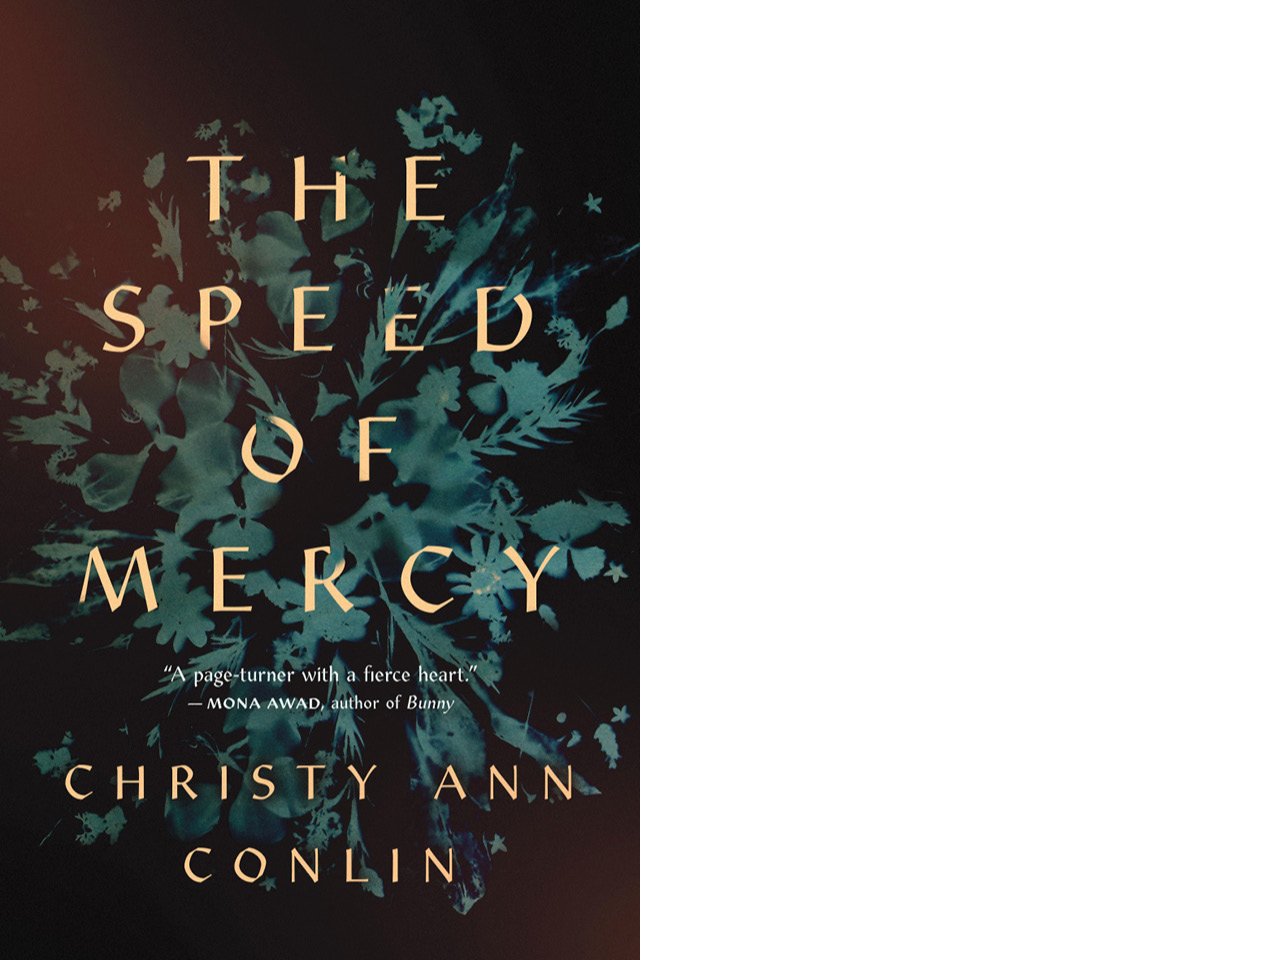 The cover of The Speed of Mercy